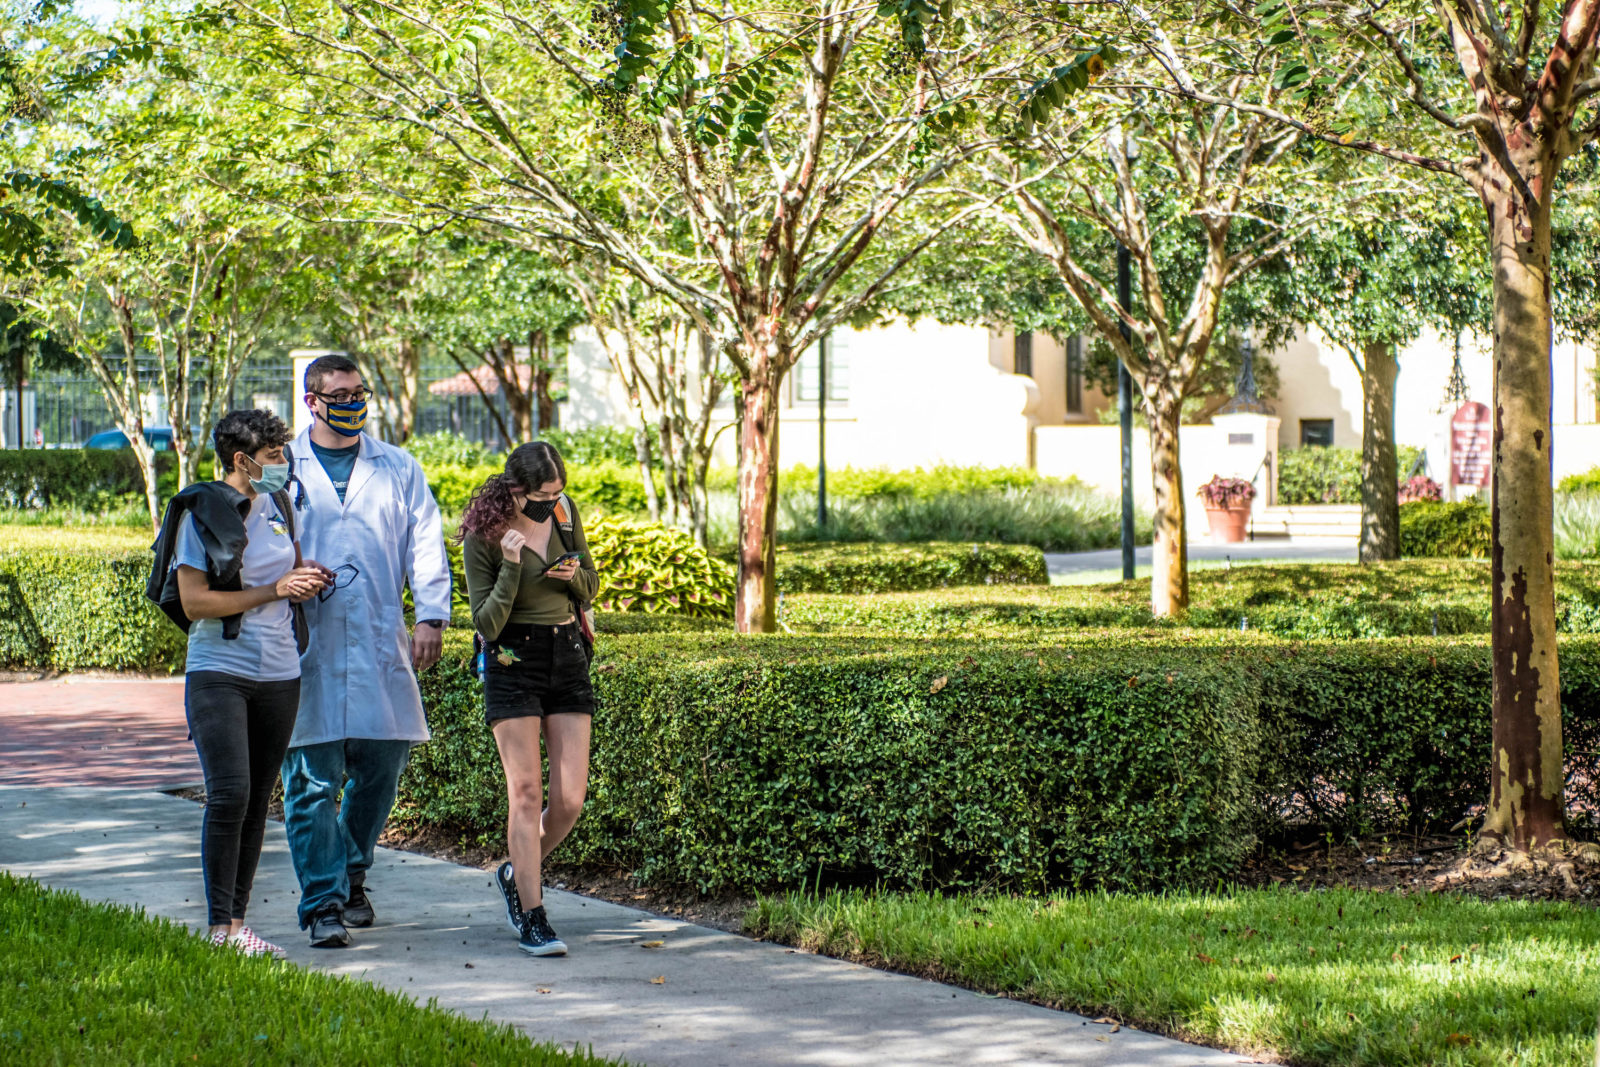 Students at Rollins College walk outdoors with face masks on.